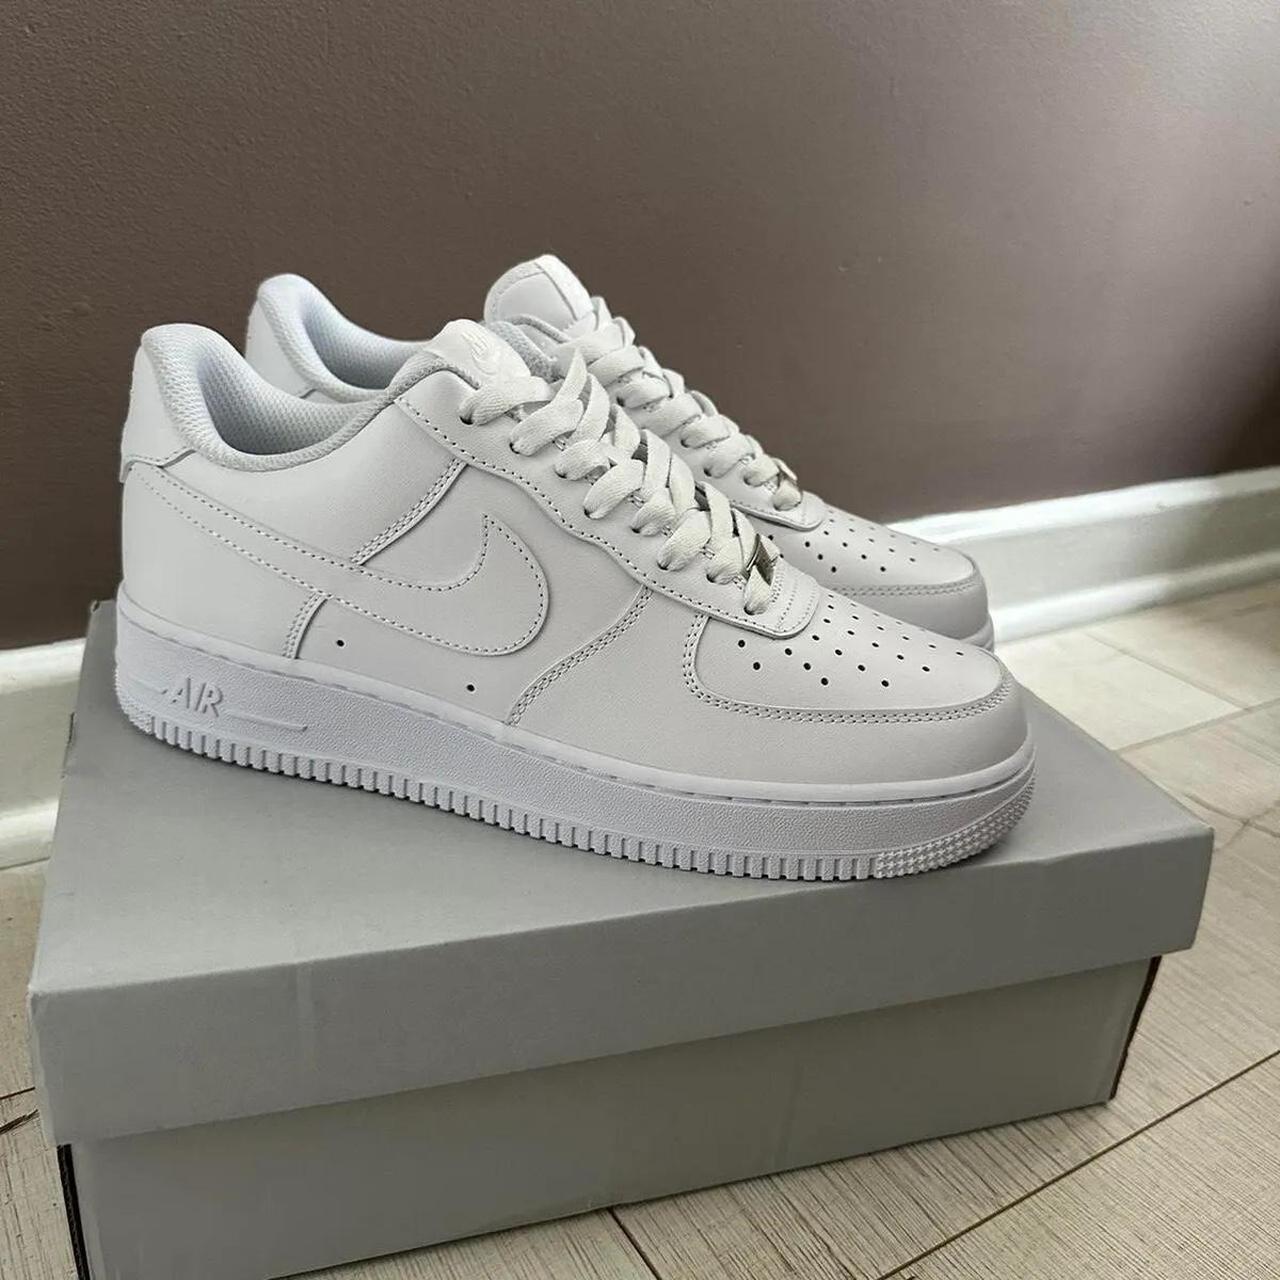 Air force 1 Size 6 Worn a bit dirty will be cleaned... - Depop